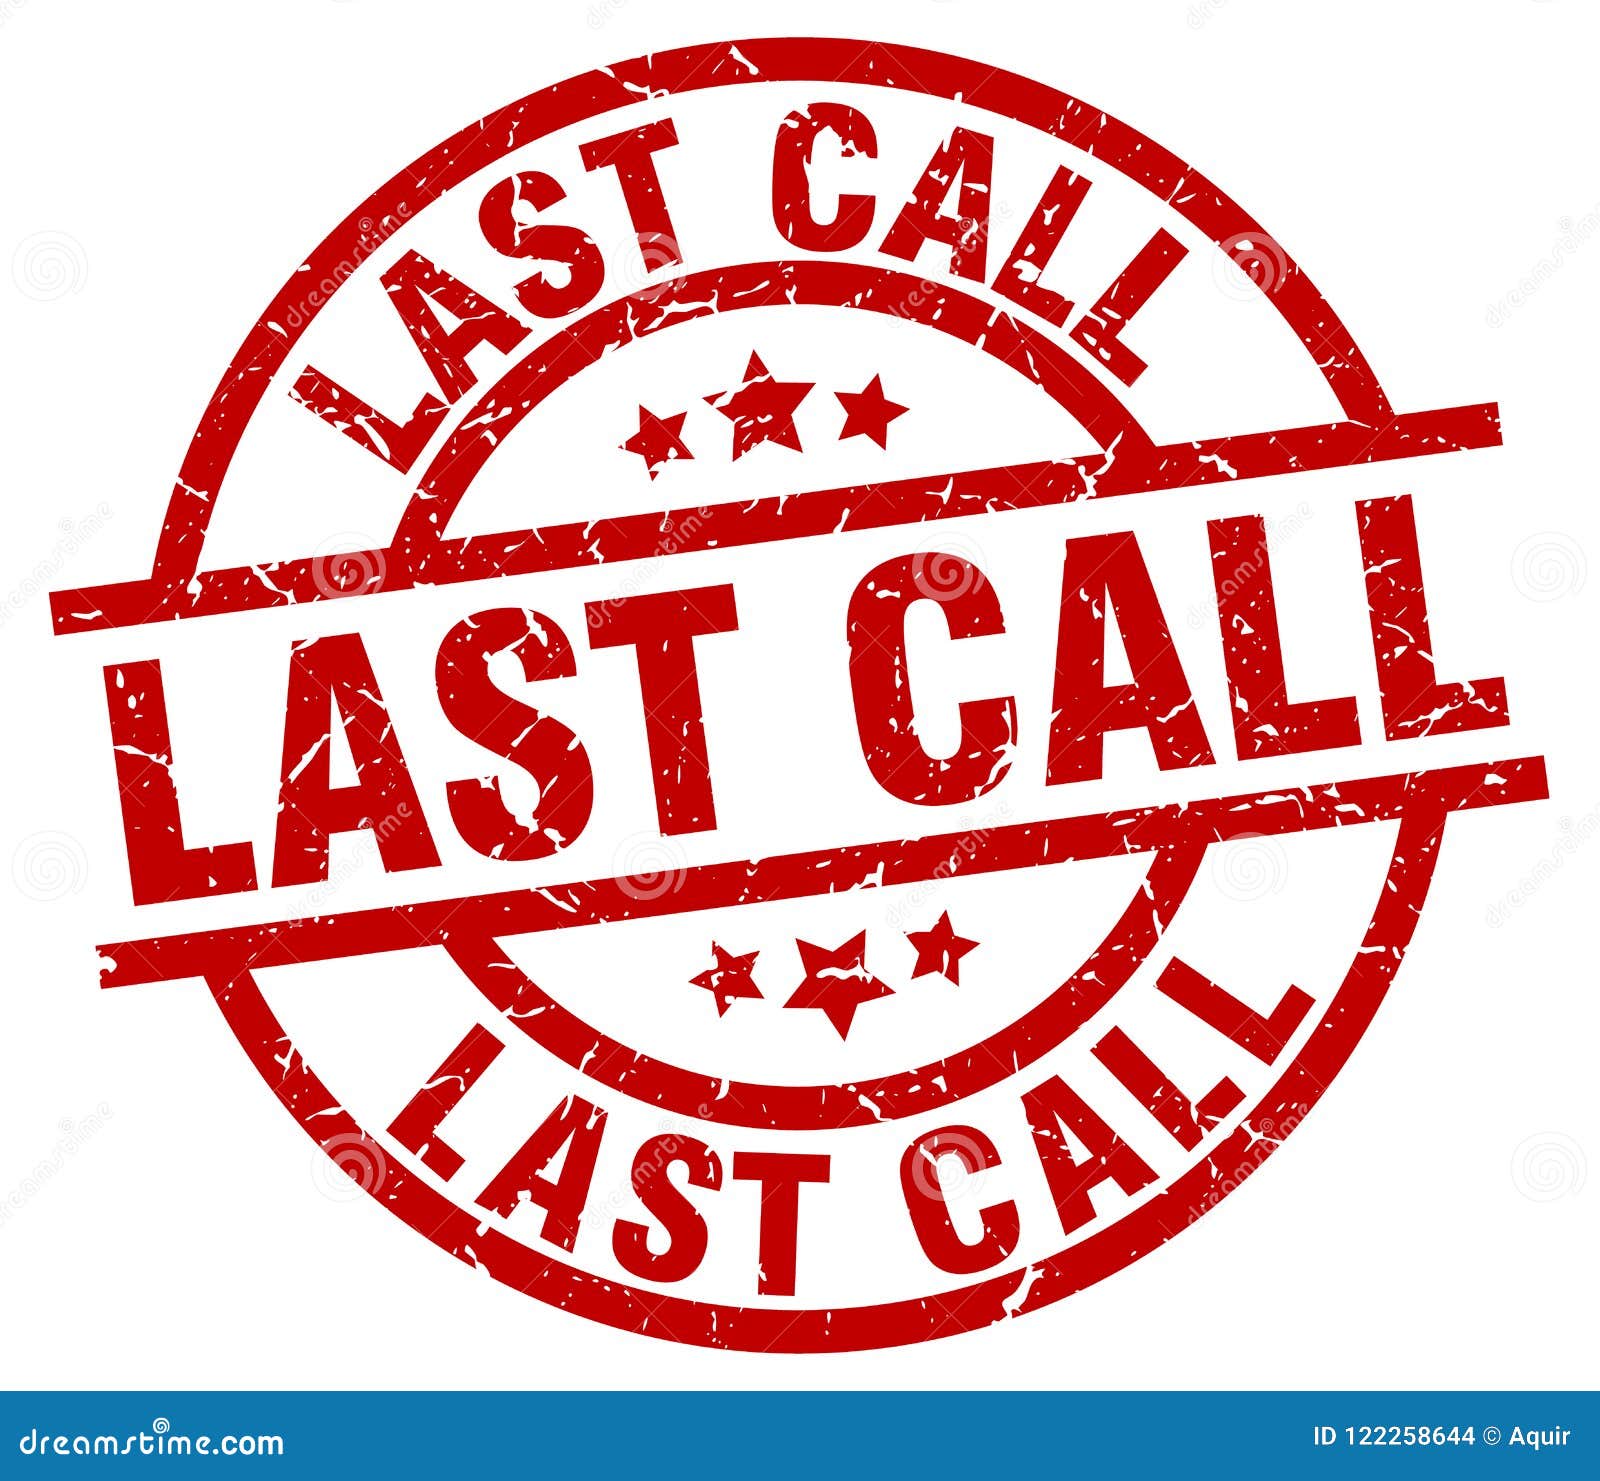 last-call-stamp-last-call-grunge-vintage-stamp-isolated-white-background-last-call-sign-122258644.jpg